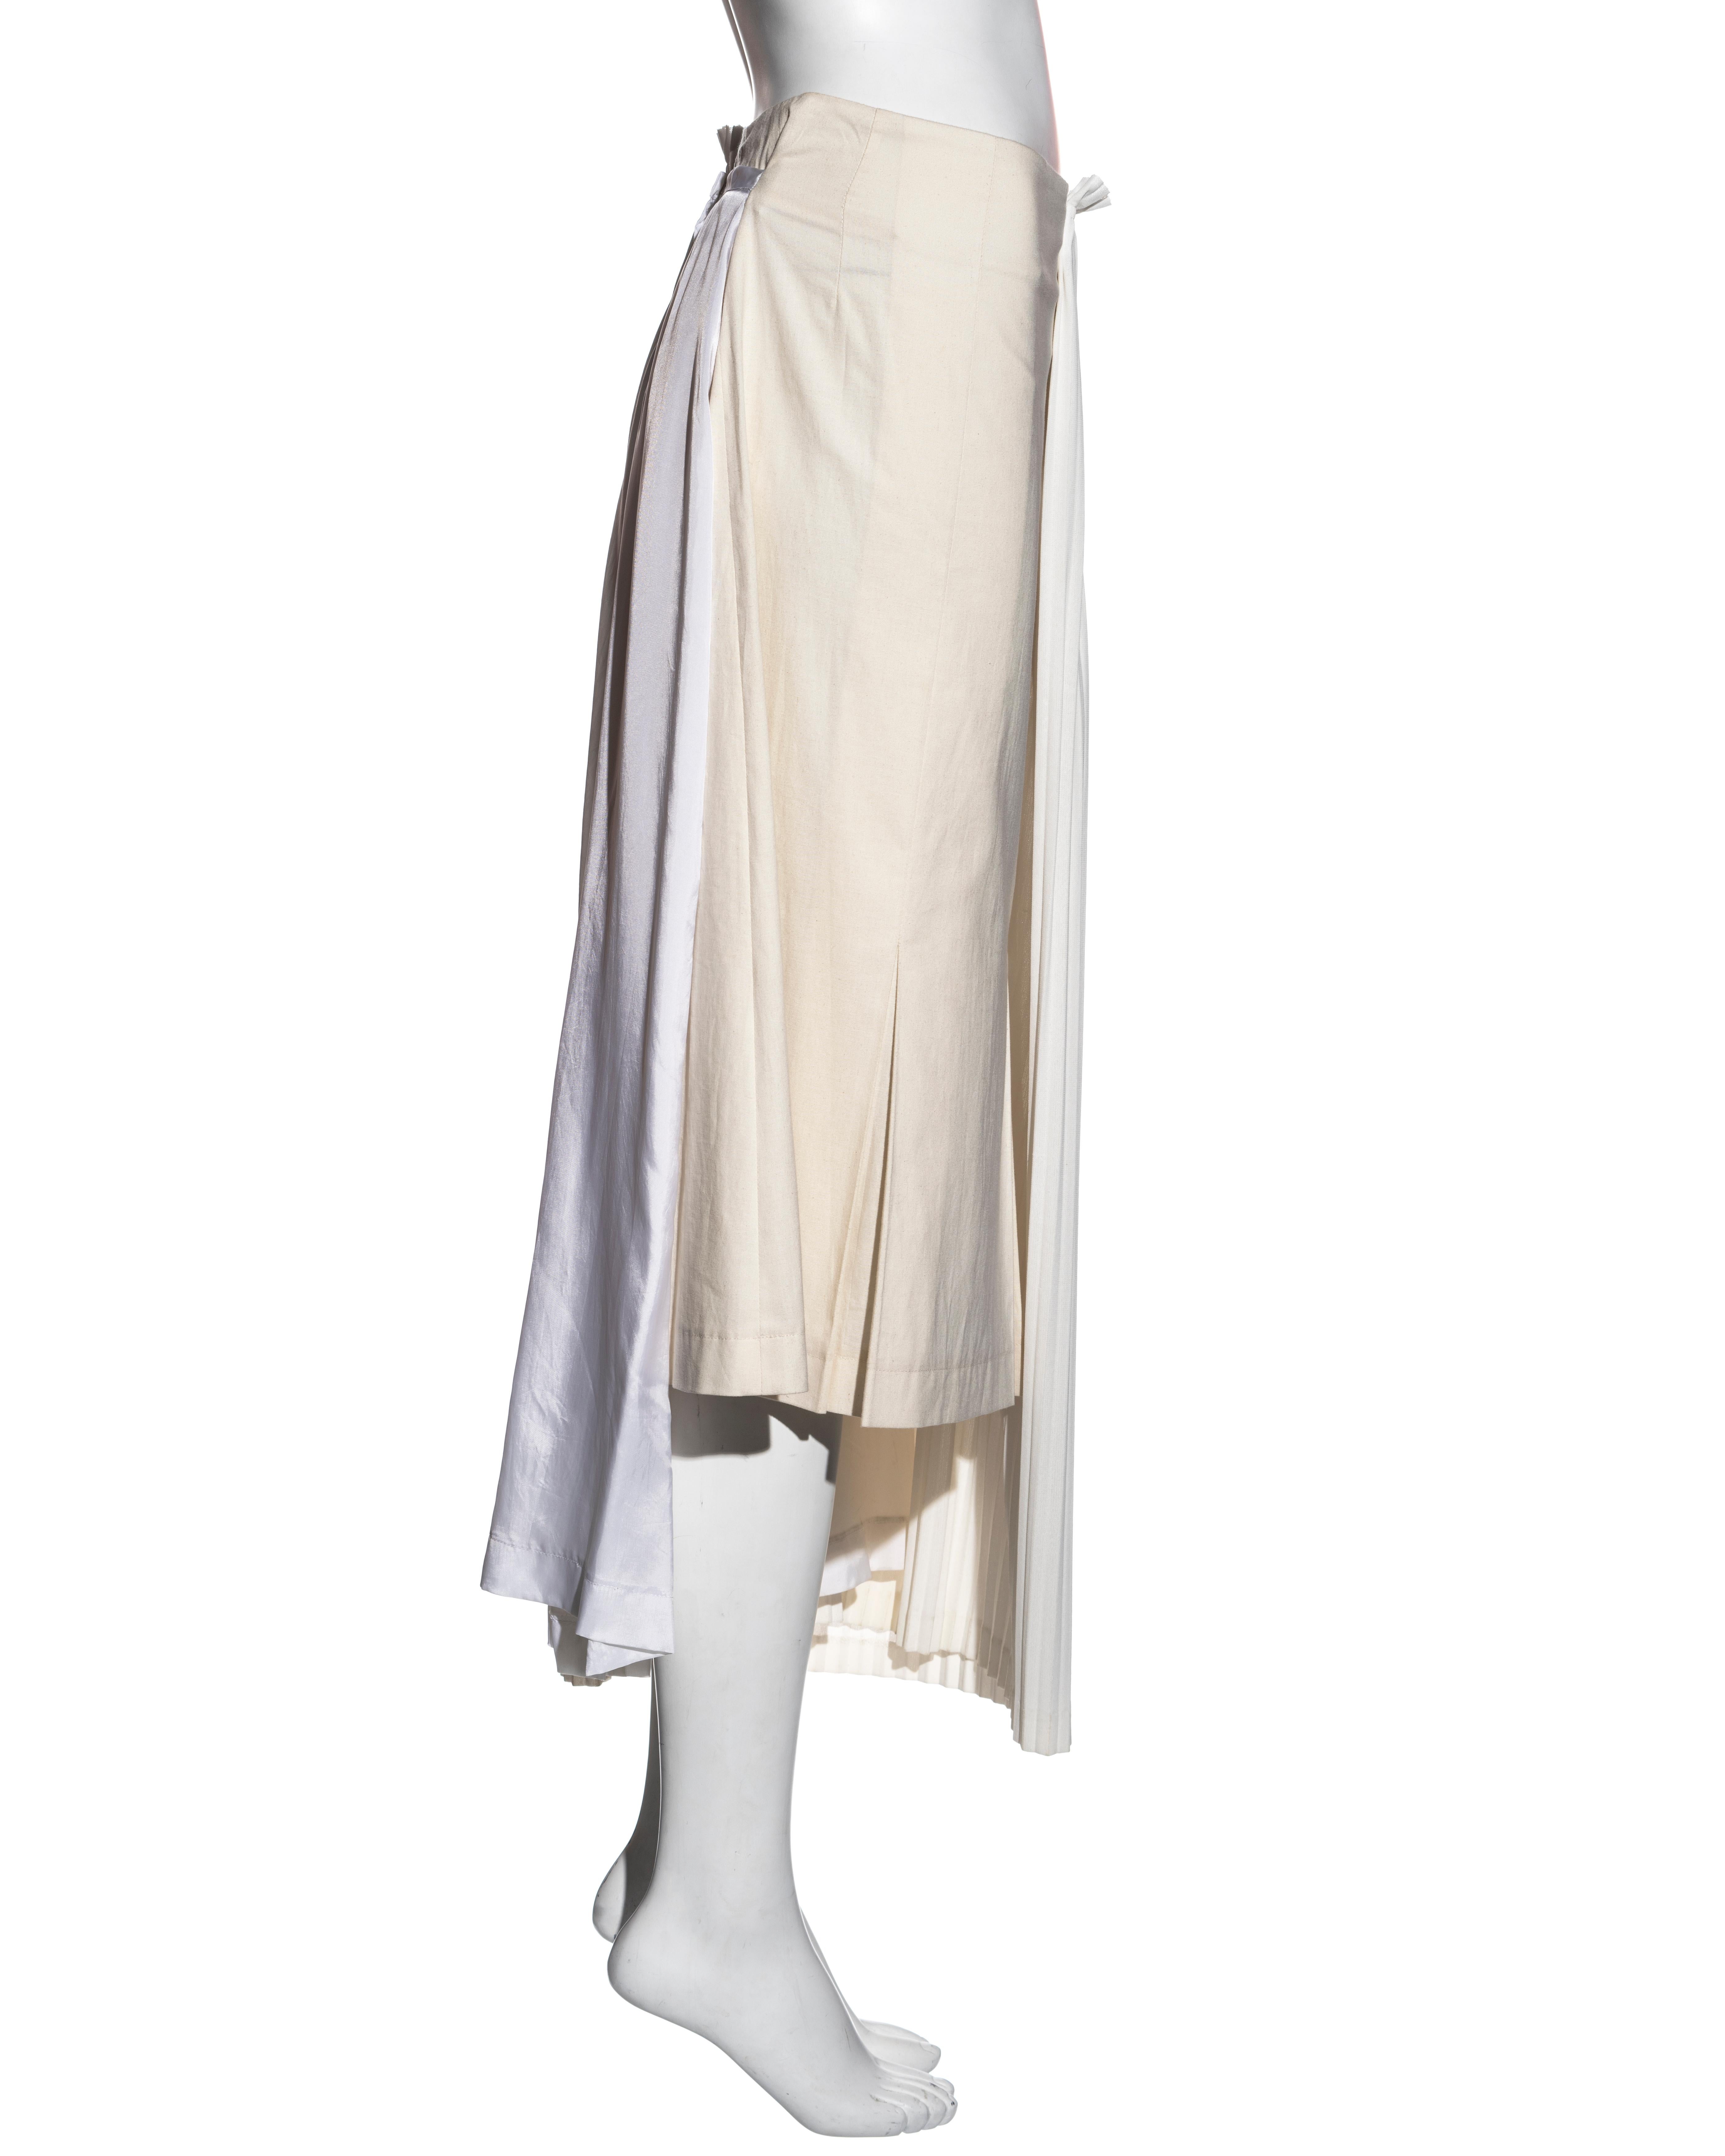 Gray Comme des Garçons deconstructed cream accordion pleated skirt, ss 2002 For Sale